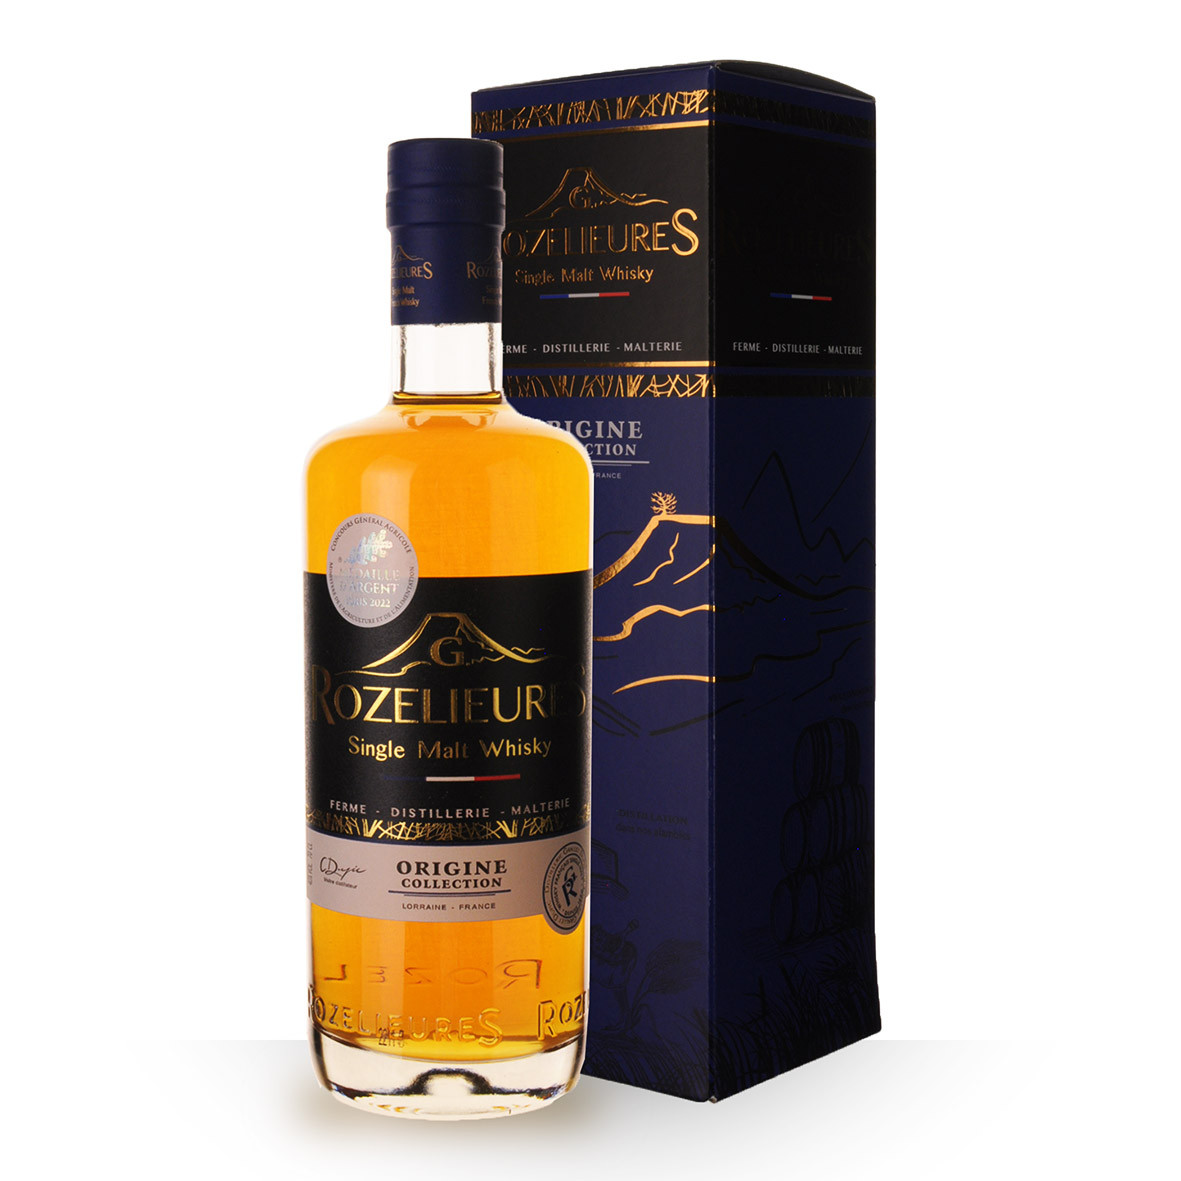 Whisky Rozelieures Origine Collection 70cl Etui www.odyssee-vins.com